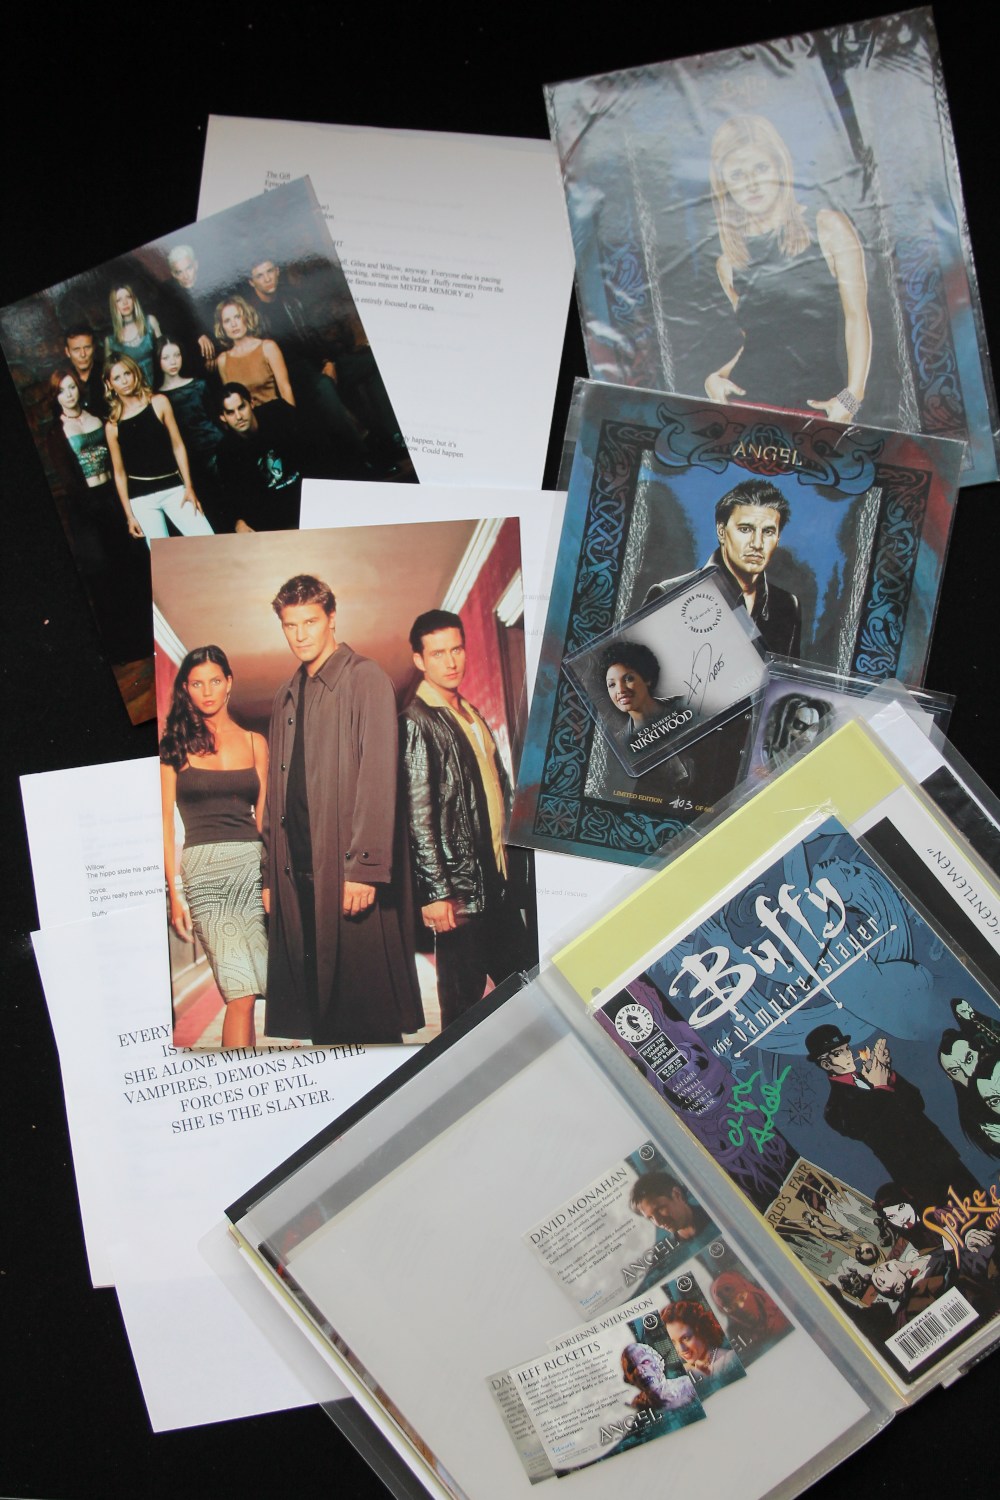 BUFFY THE VAMPIRE SLAYER - a selection of Buffy the Vampire cast autographs (cards and photographs)